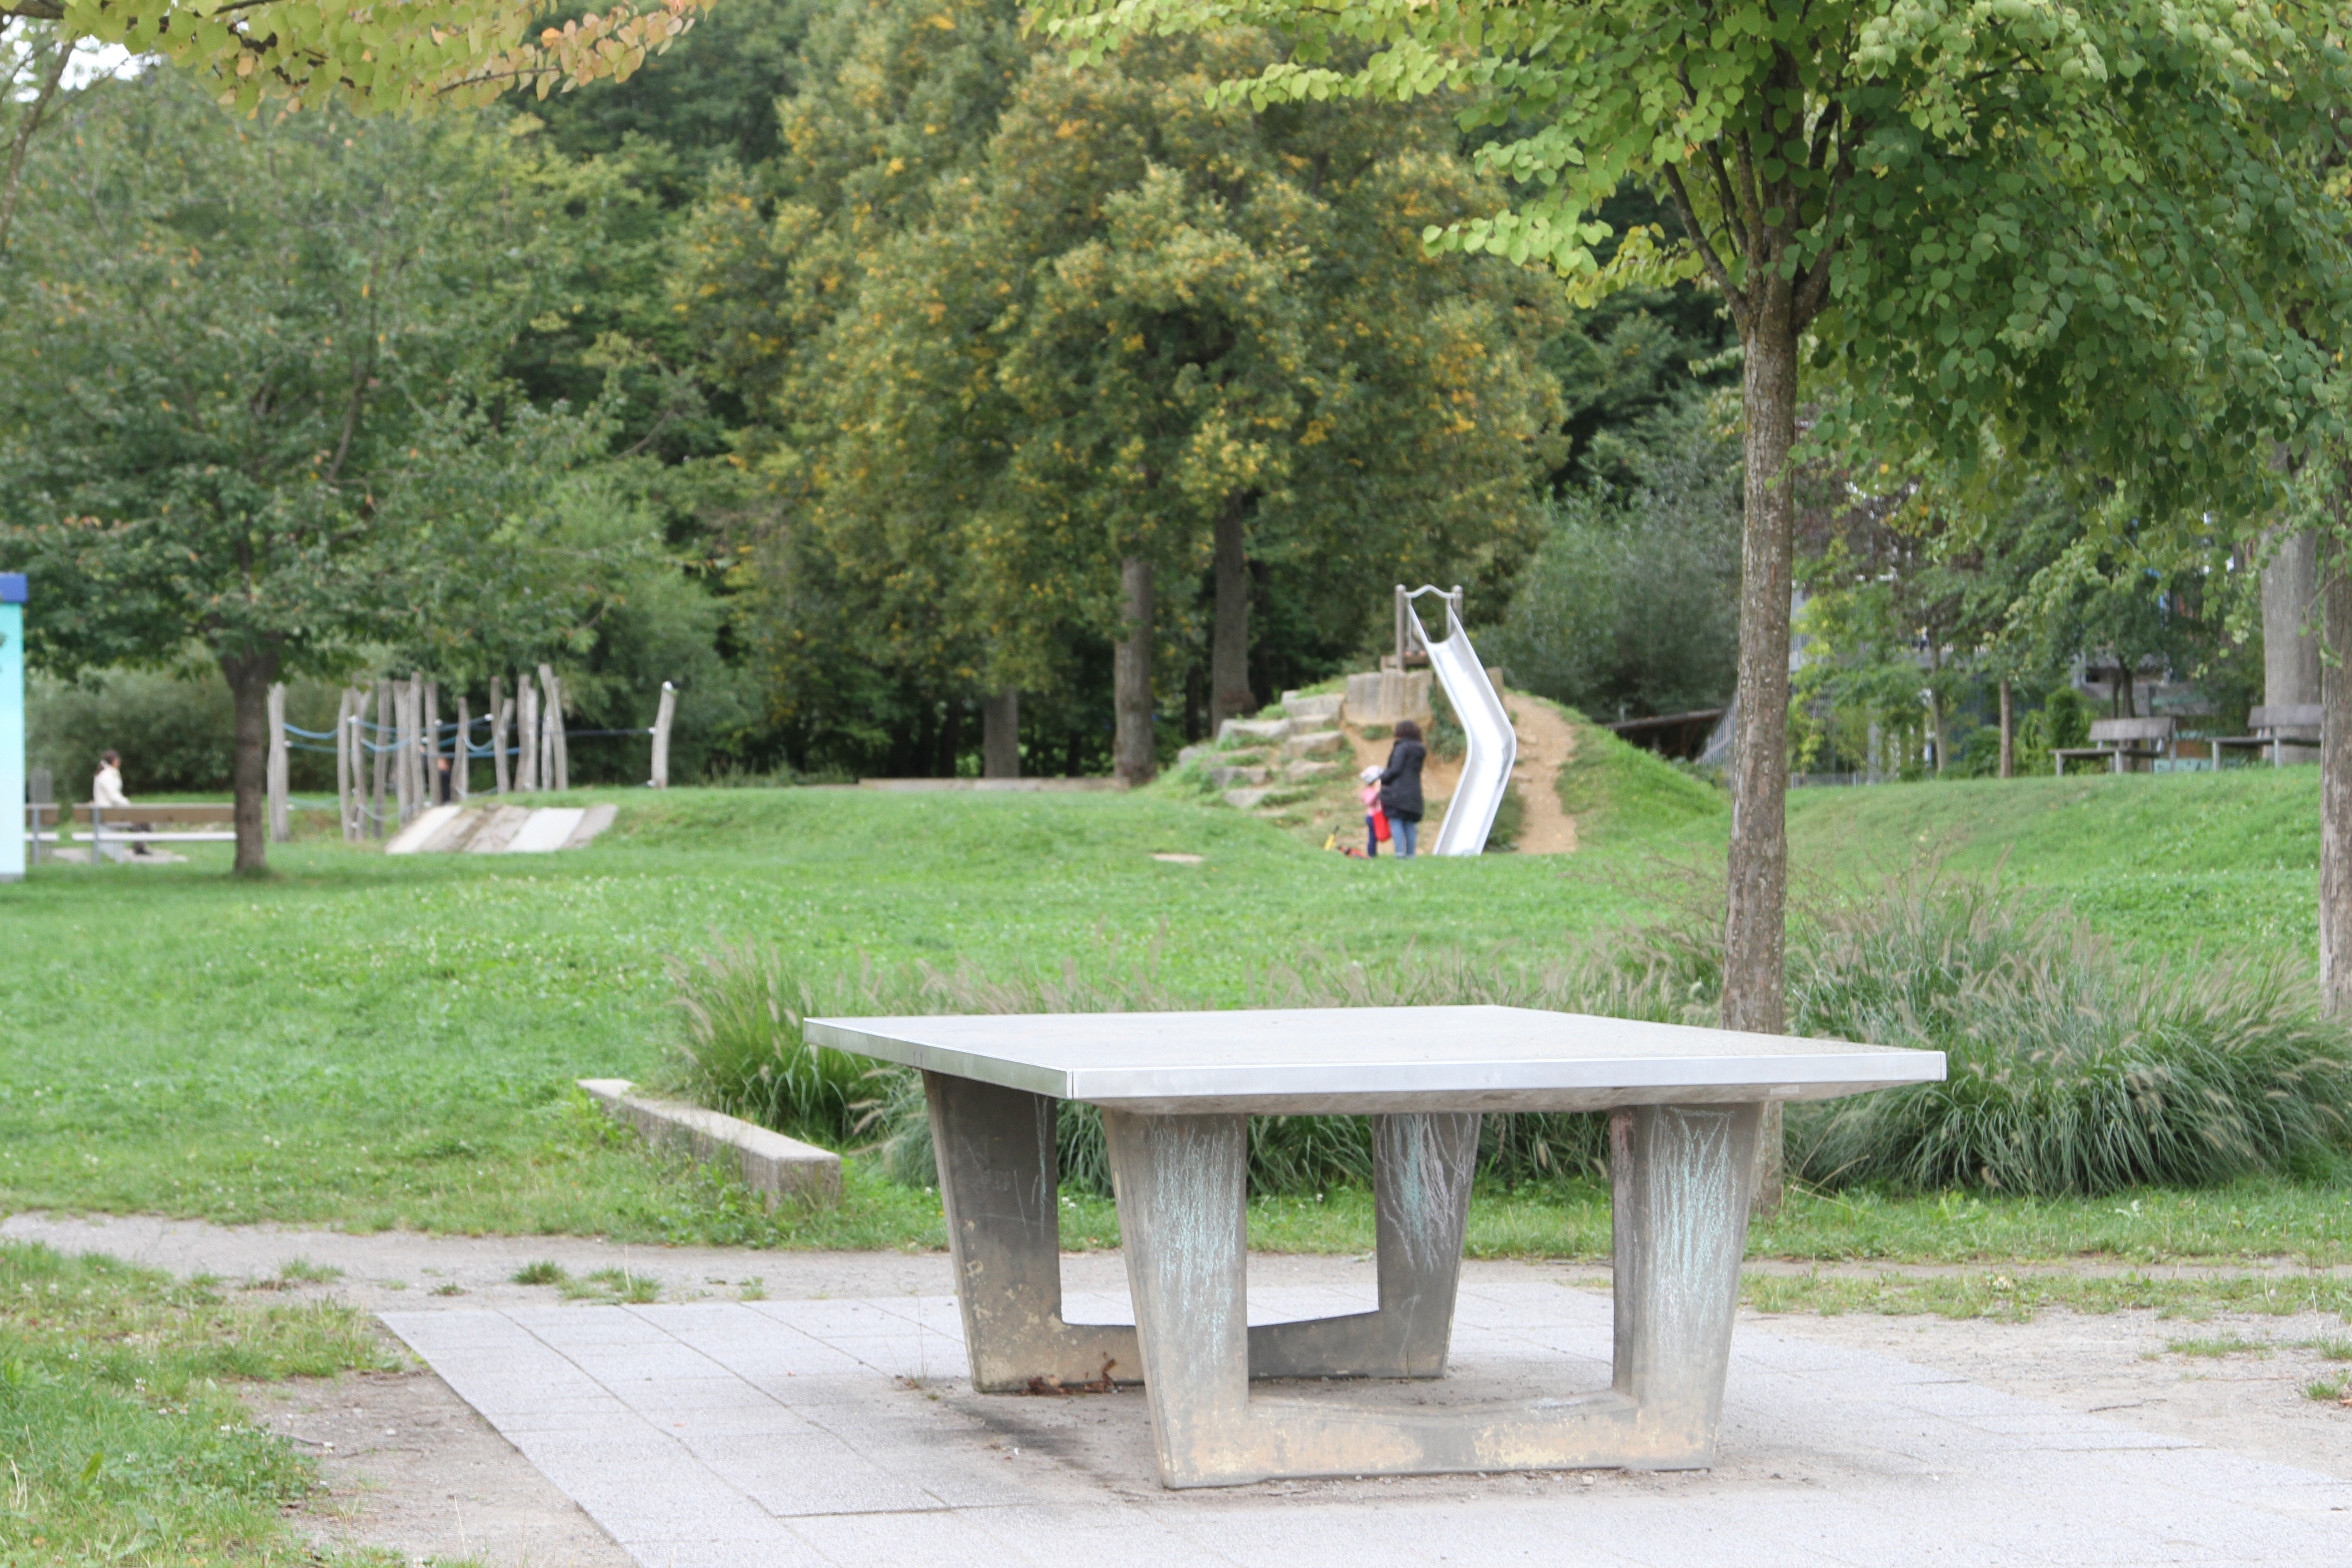 A game table in the middle of a park, with a slide and other playground equipment in the background.